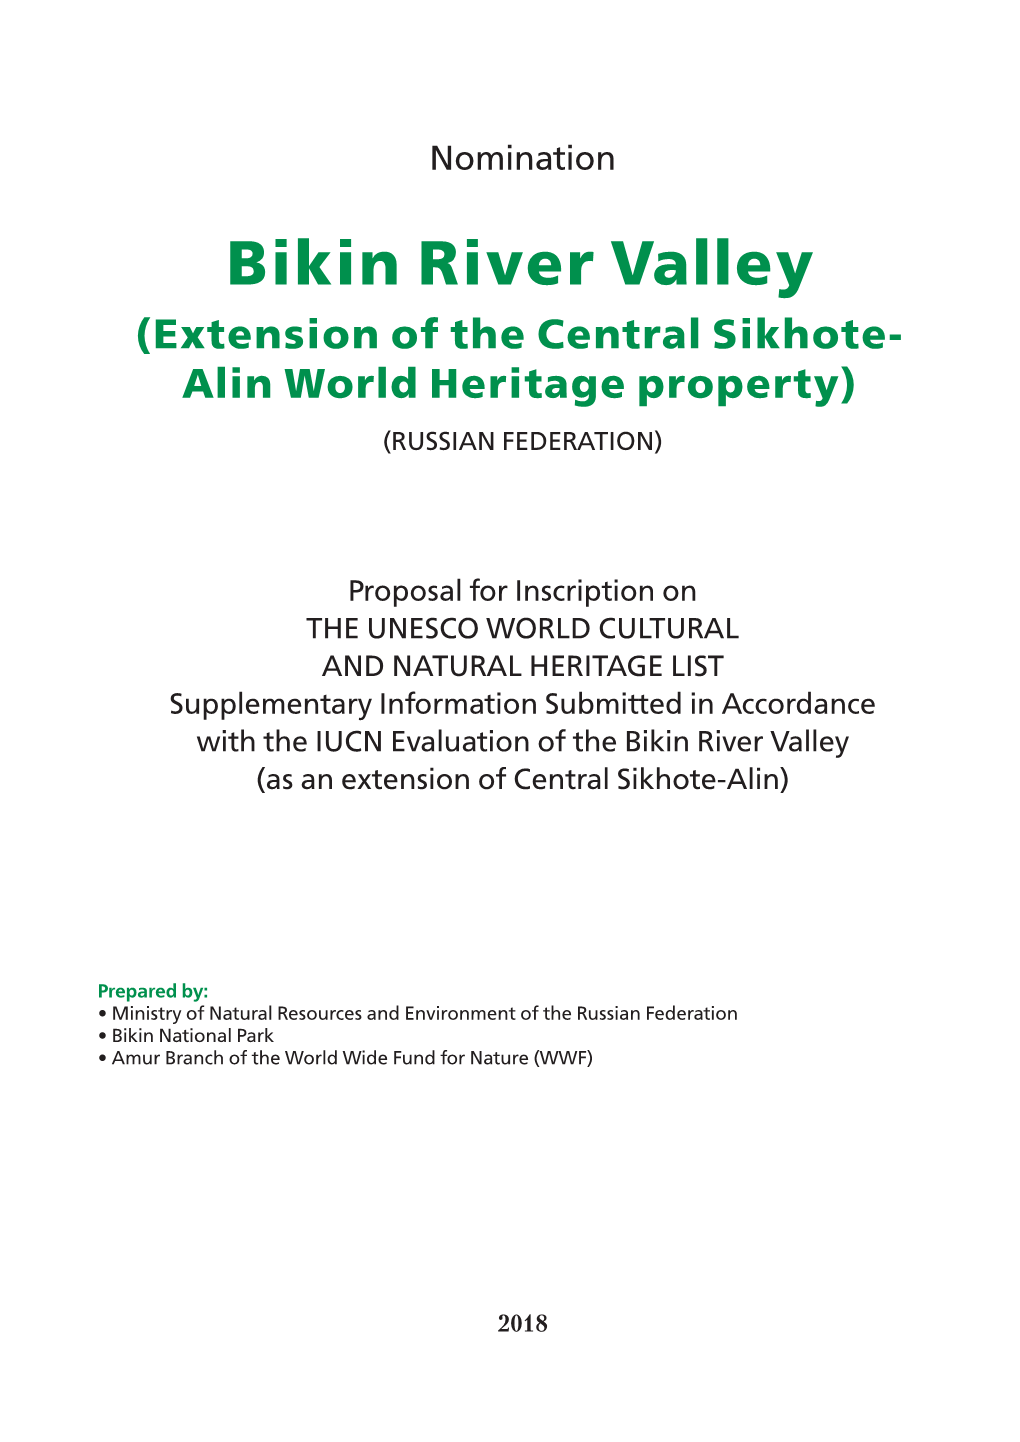 Bikin River Valley (Extension of the Central Sikhote- Alin World Heritage Property) (RUSSIAN FEDERATION)